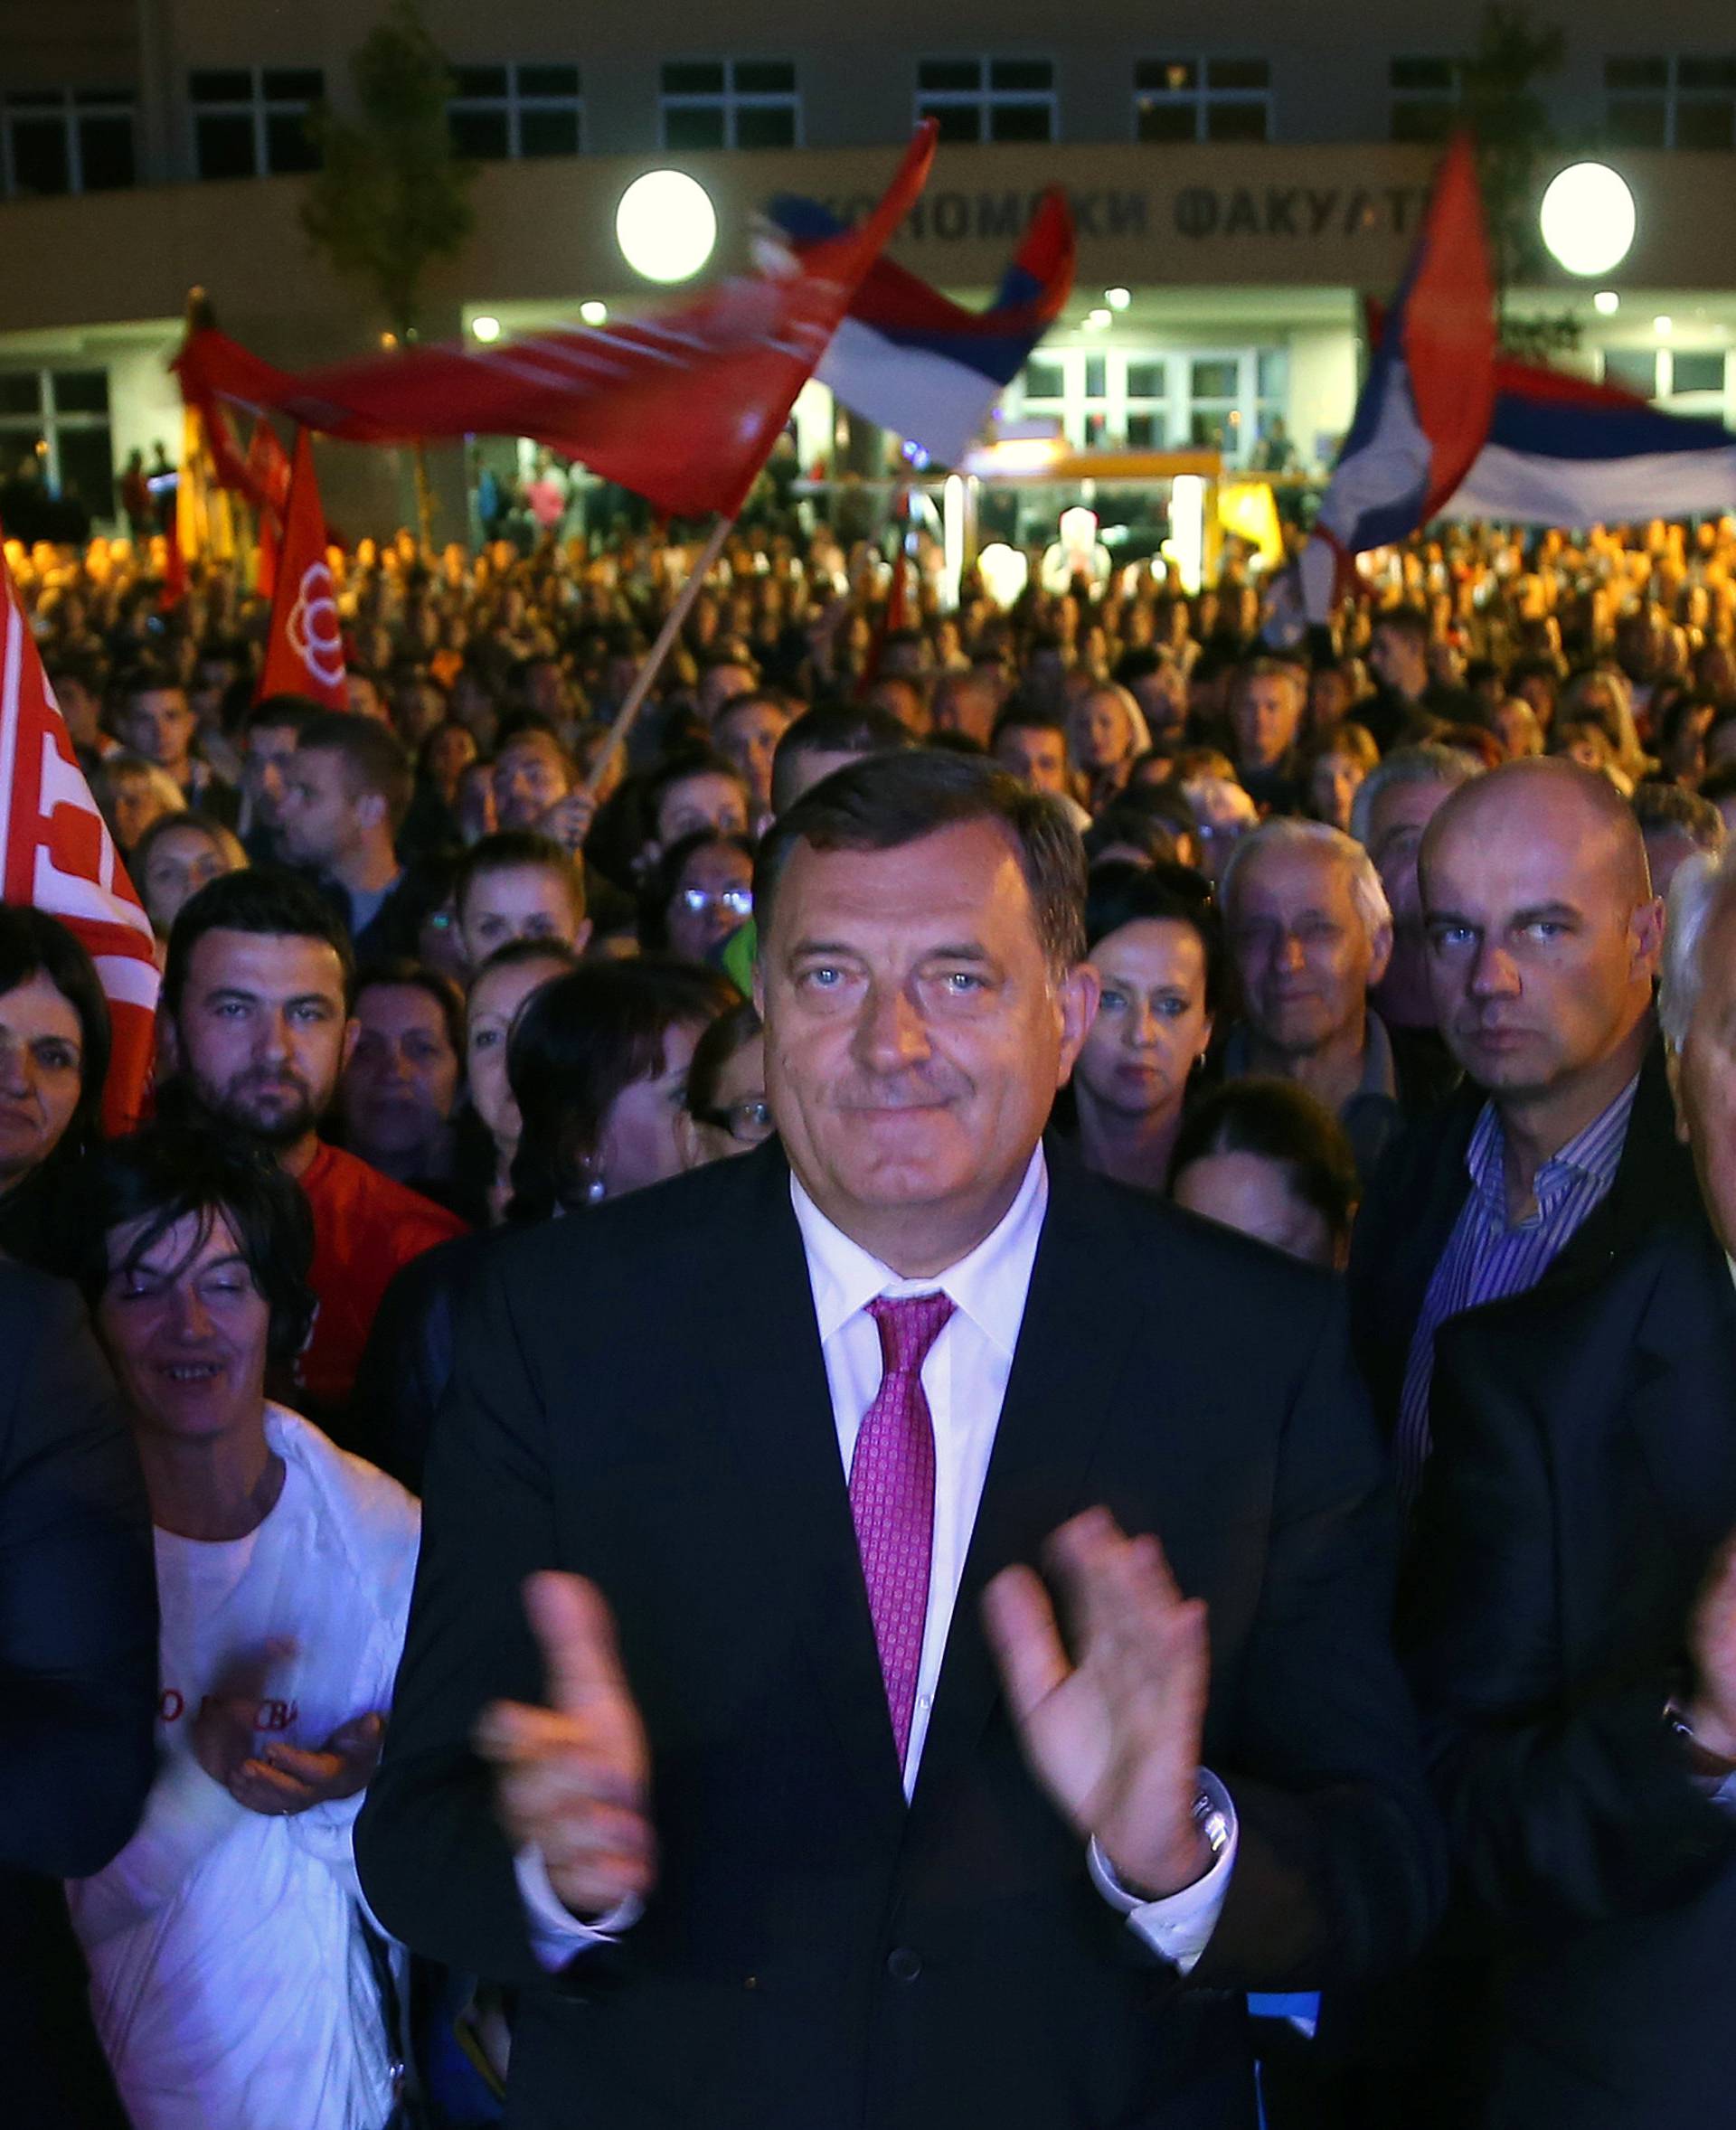 Dodik celebrates the results of a referendum over a disputed national holiday during an election rally in Pale